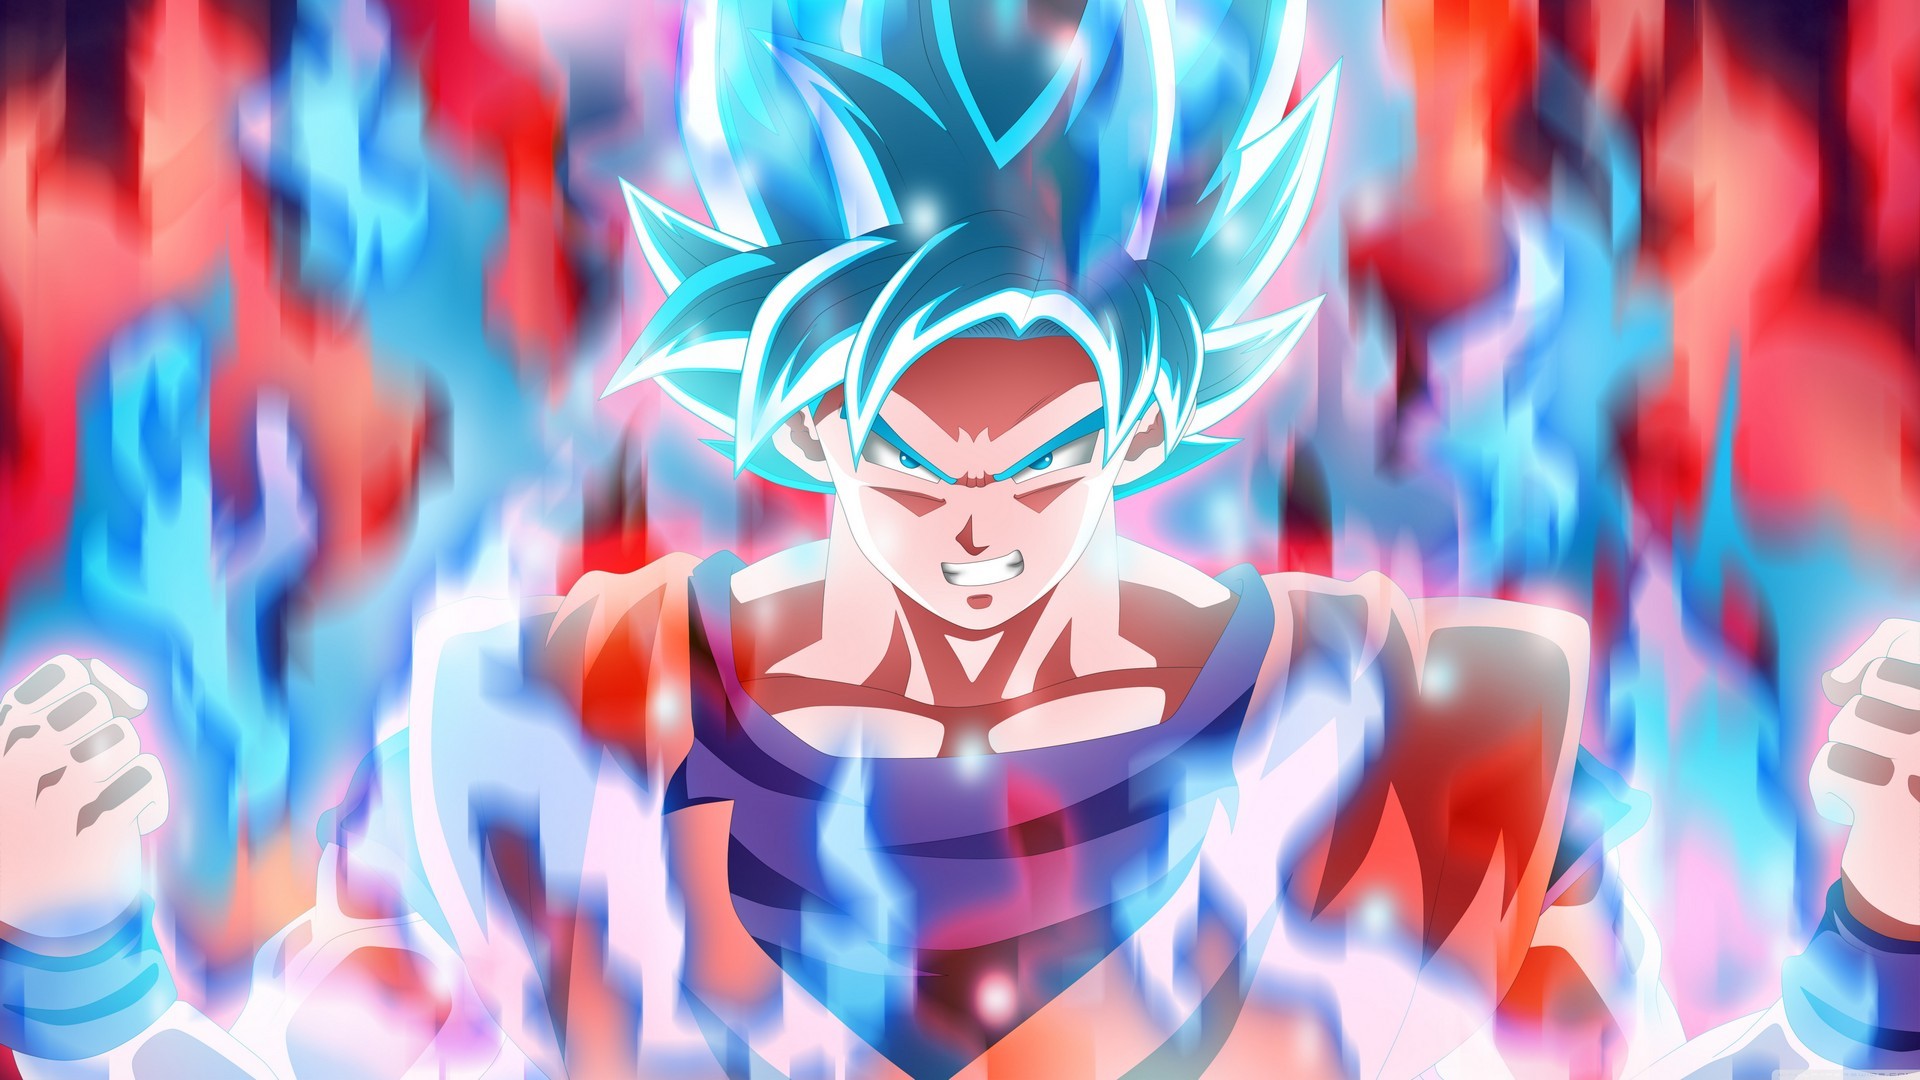 Wallpapers Goku SSJ Blue with resolution 1920X1080 pixel. You can use this wallpaper as background for your desktop Computer Screensavers, Android or iPhone smartphones